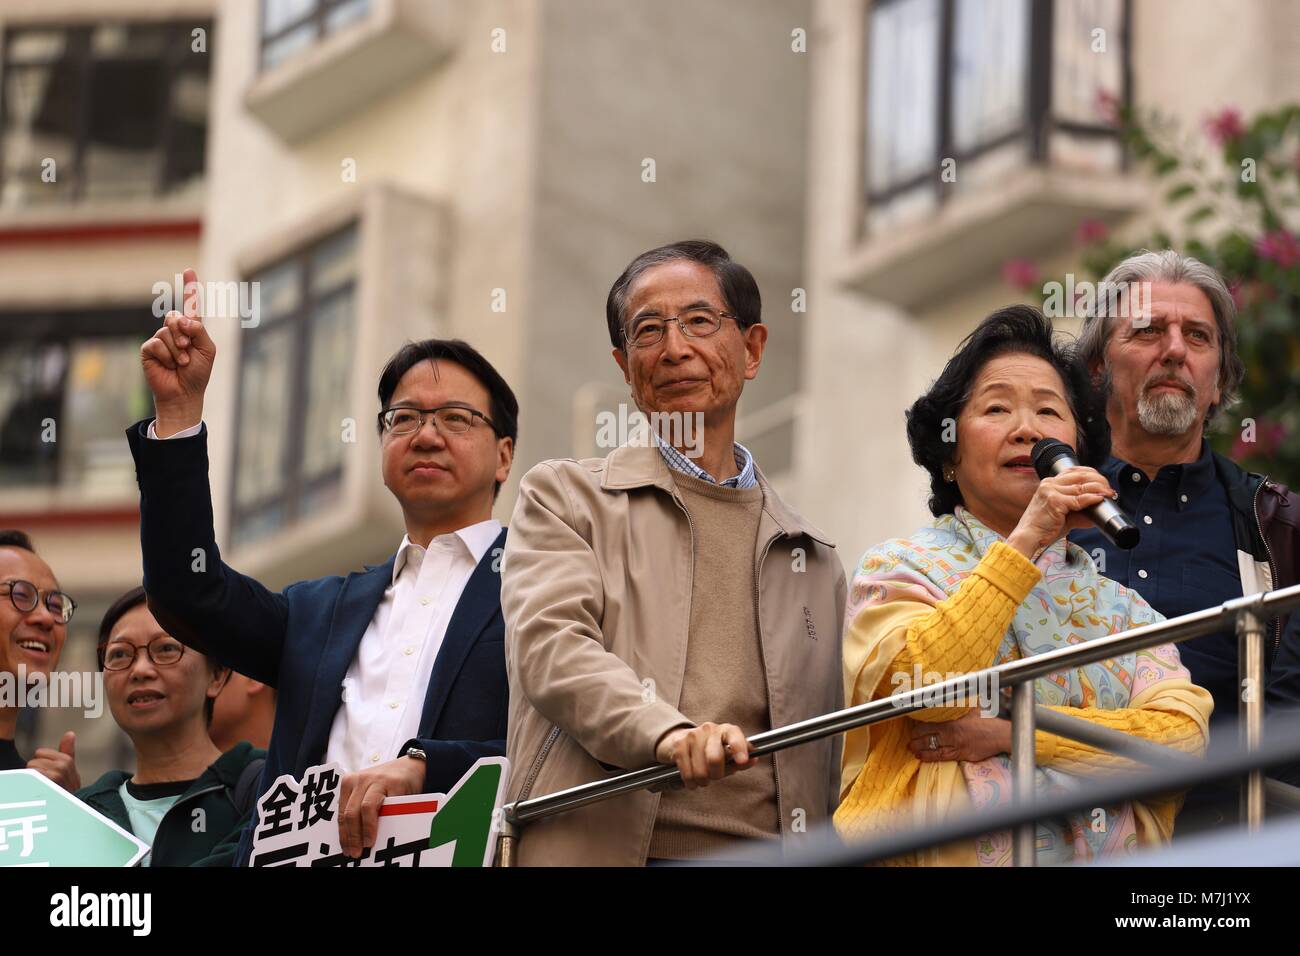 Hong Kong, CHINA. 11th Mar, 2018. Founder and former Chairman of the DEMOCRATIC PARTY, Martin Lee ( C ) show up to support Democratic Party Candidate No.1 Au Kok-hin on the voting date during LEGICO By-Election campaign. Mar-11, 2018.Hong Kong.ZUMA/Liau Chung Ren Credit: Liau Chung Ren/ZUMA Wire/Alamy Live News Stock Photo